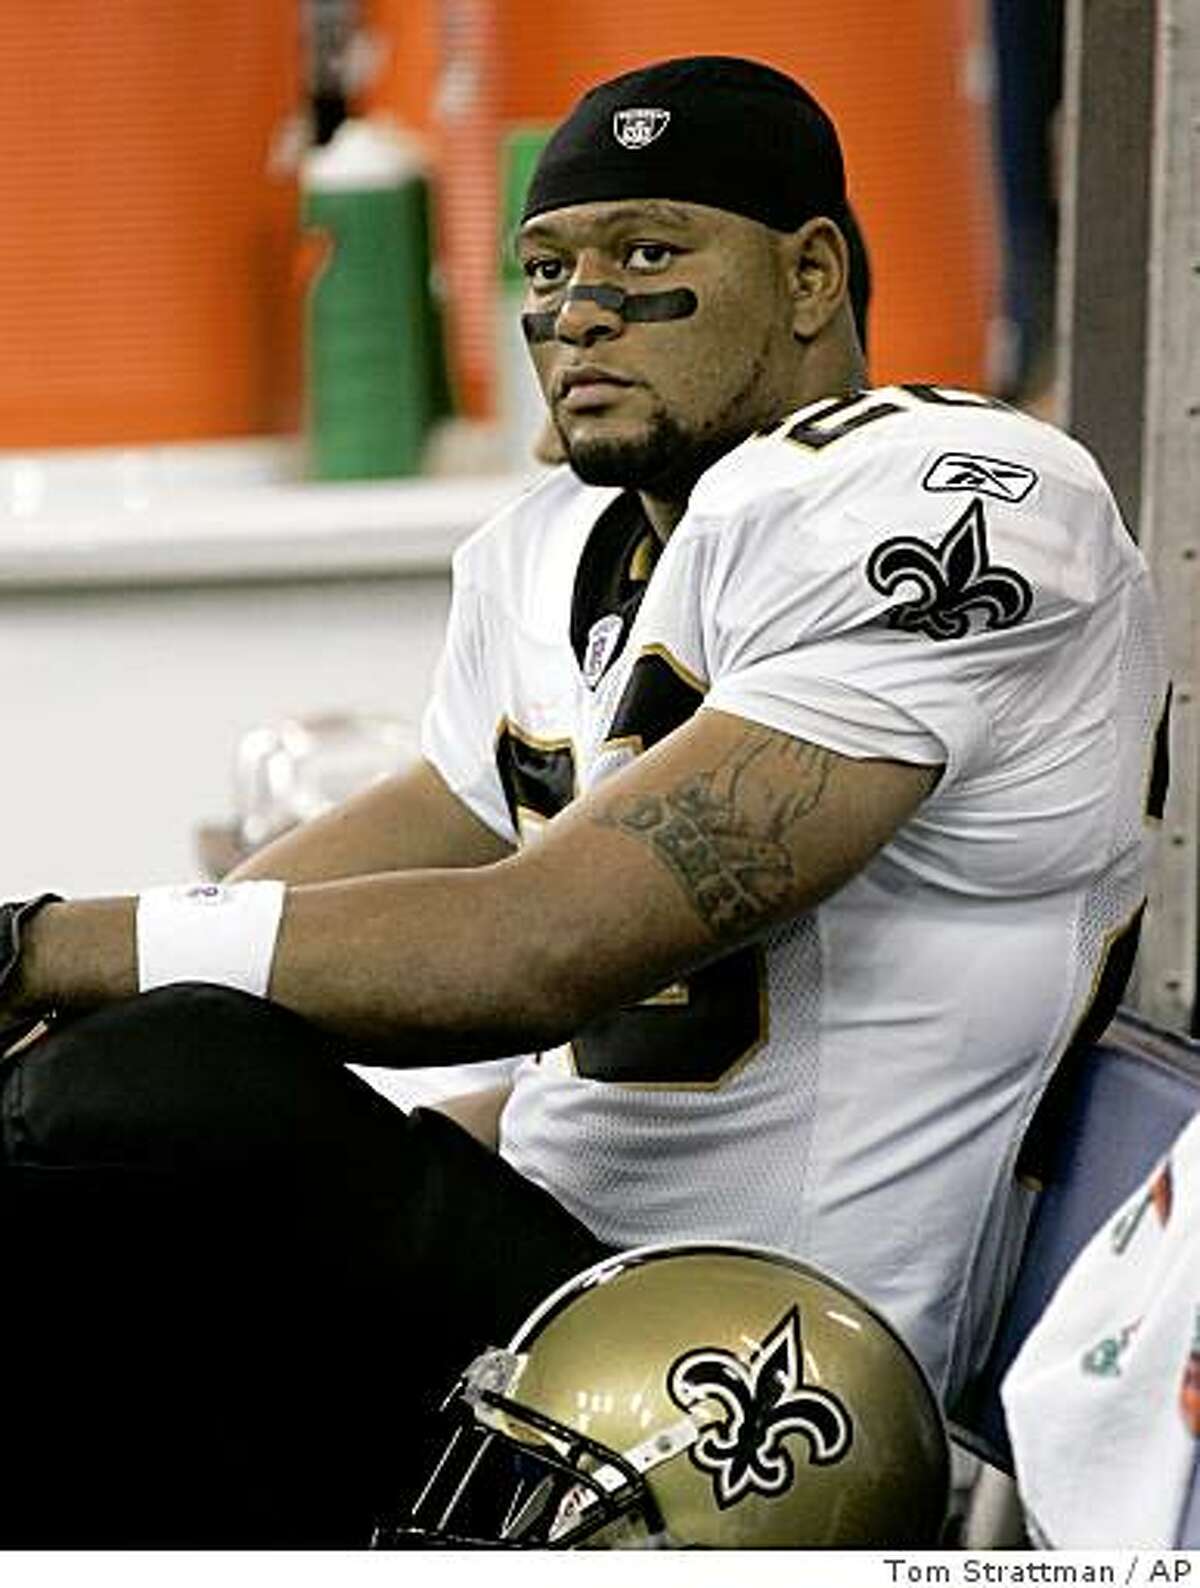 ** FILE ** In this Sept. 6, 2007, file photo, New Orleans Saints running back Deuce McAllister sits on the bench late in the fourth quarter of an NFL football game against the Indianapolis Colts in Indianapolis. Saints veterans Will Smith and McAllister reportedly are among several players who have violated the NFL steroids policy. (AP Photo/Tom Strattman,file)